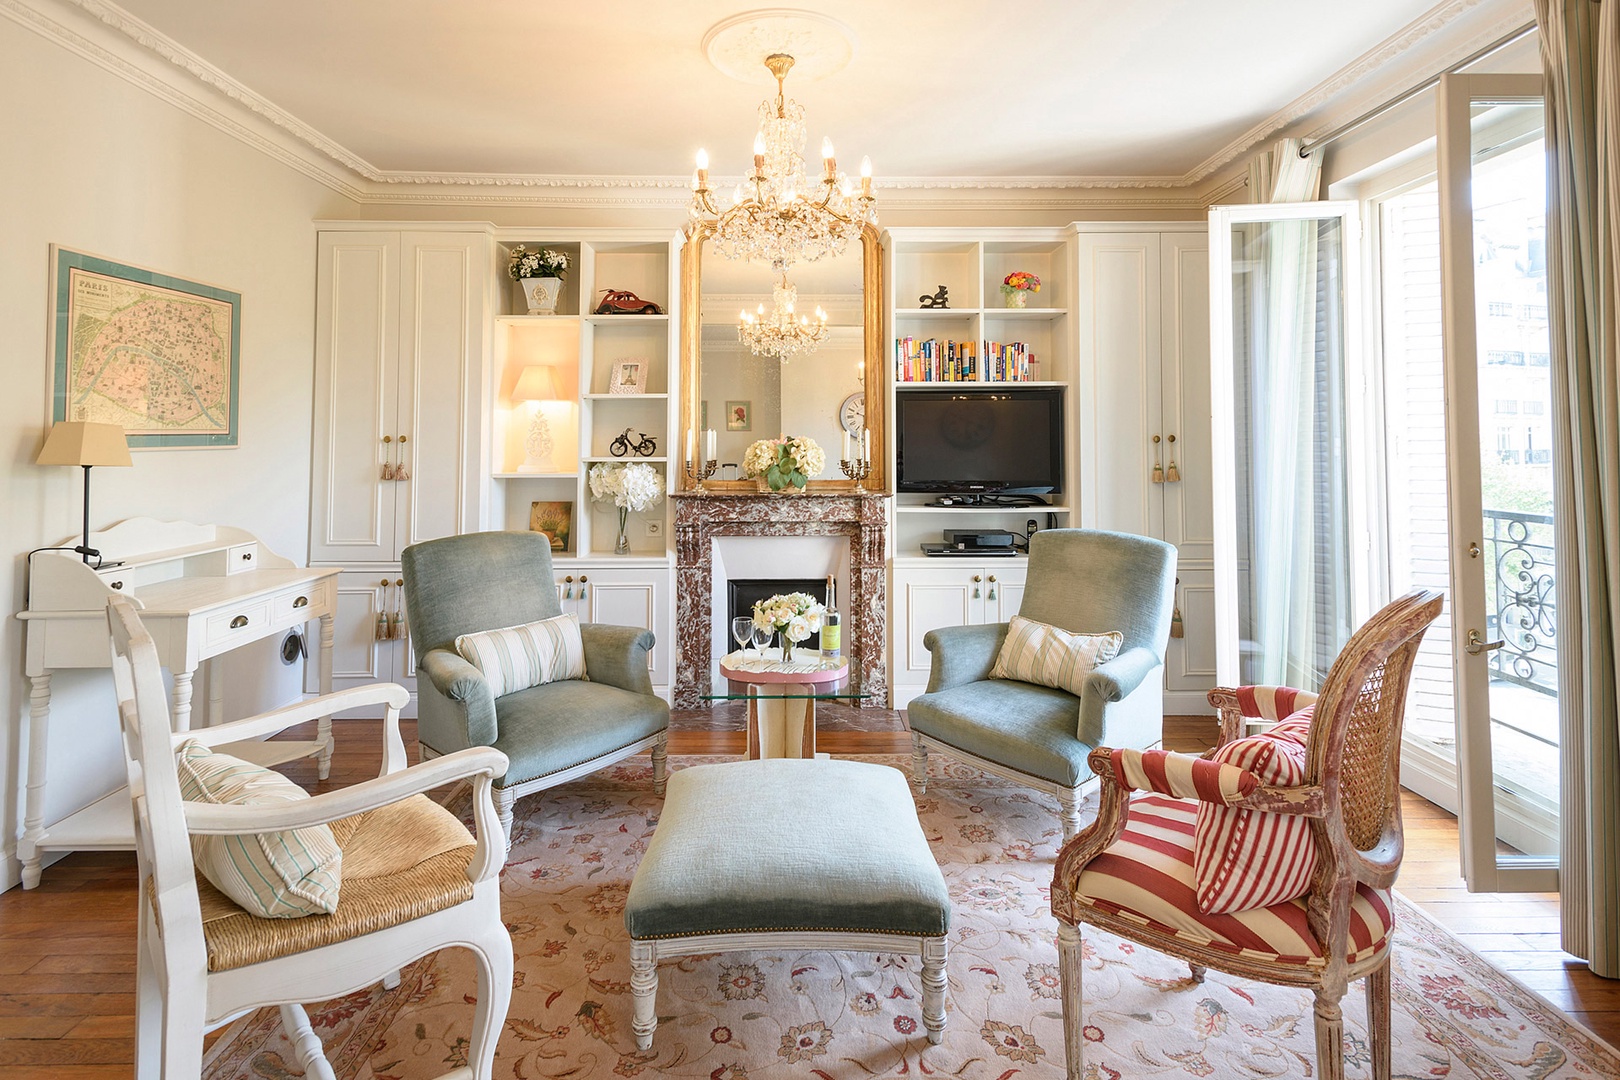 Welcome to the quaint Clairette rental, decorated with a French flair!